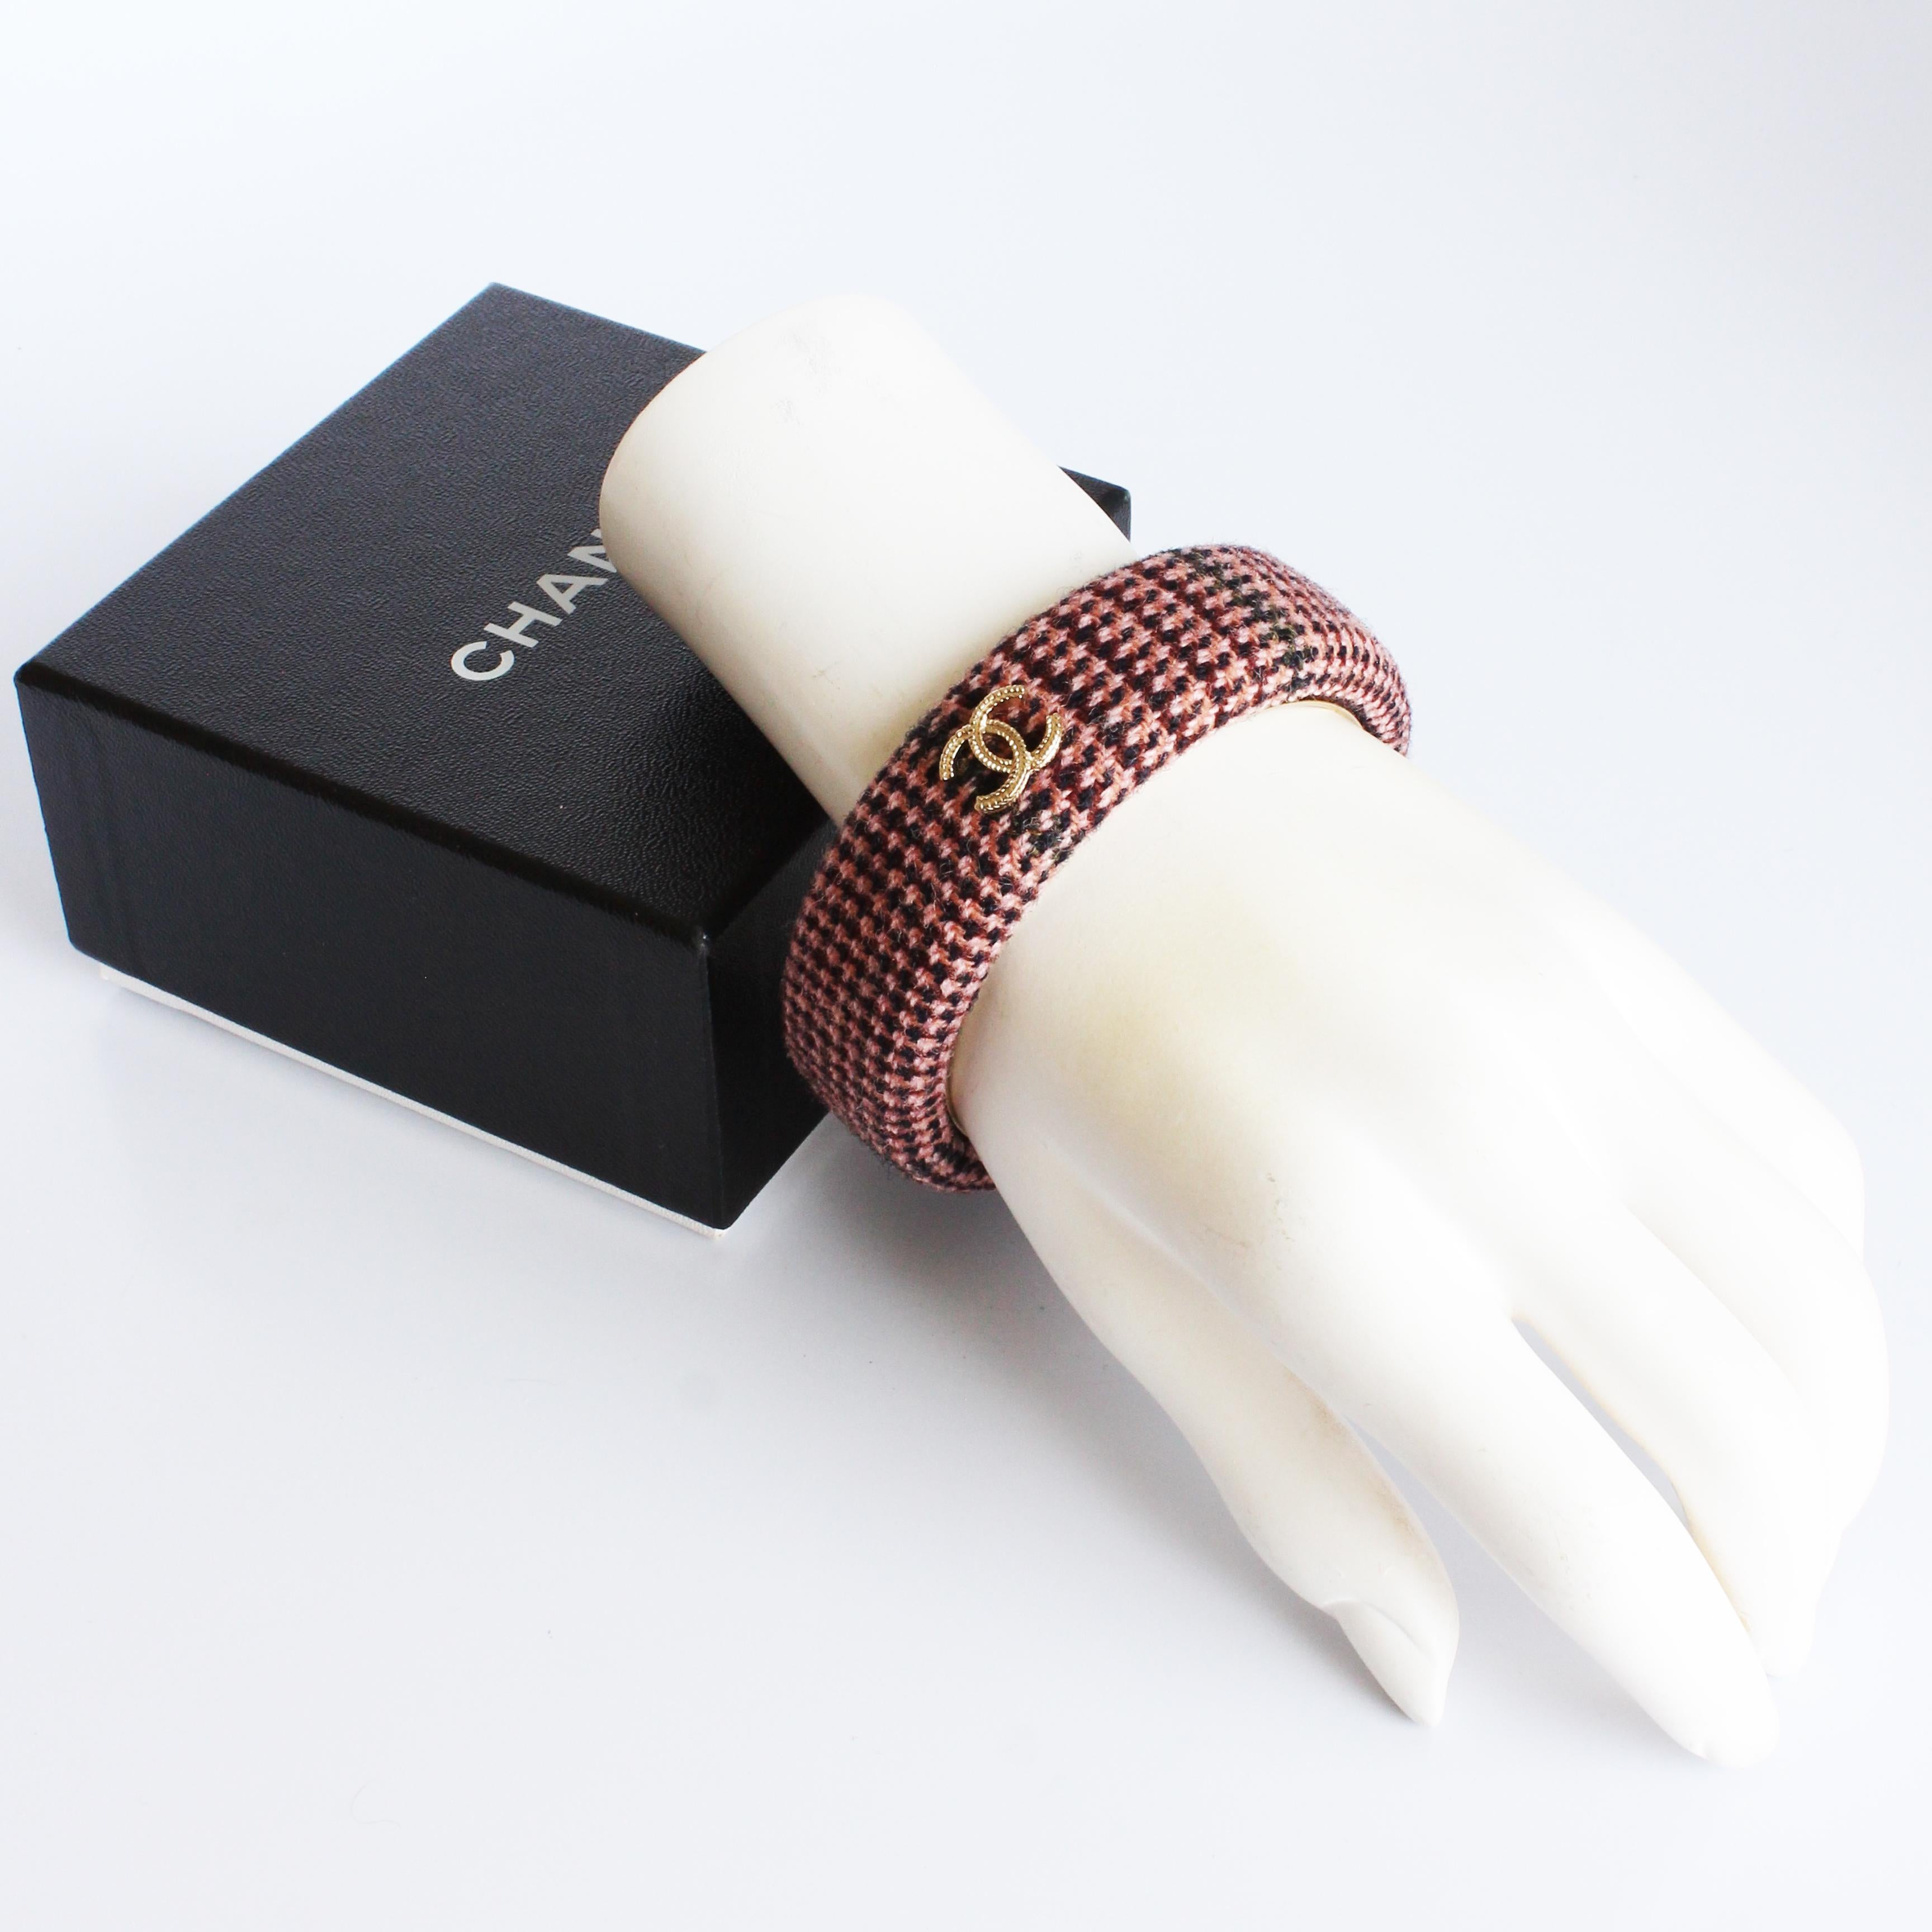 Preowned Chanel pink tweed bangle bracelet from the 13A collection.  Made from a pink multi color tweed fabric, if features Chanel's interlocking CC's in textured gold metal, and a gold metal base.

Fabulous and sophisticated, the tweed fabric and